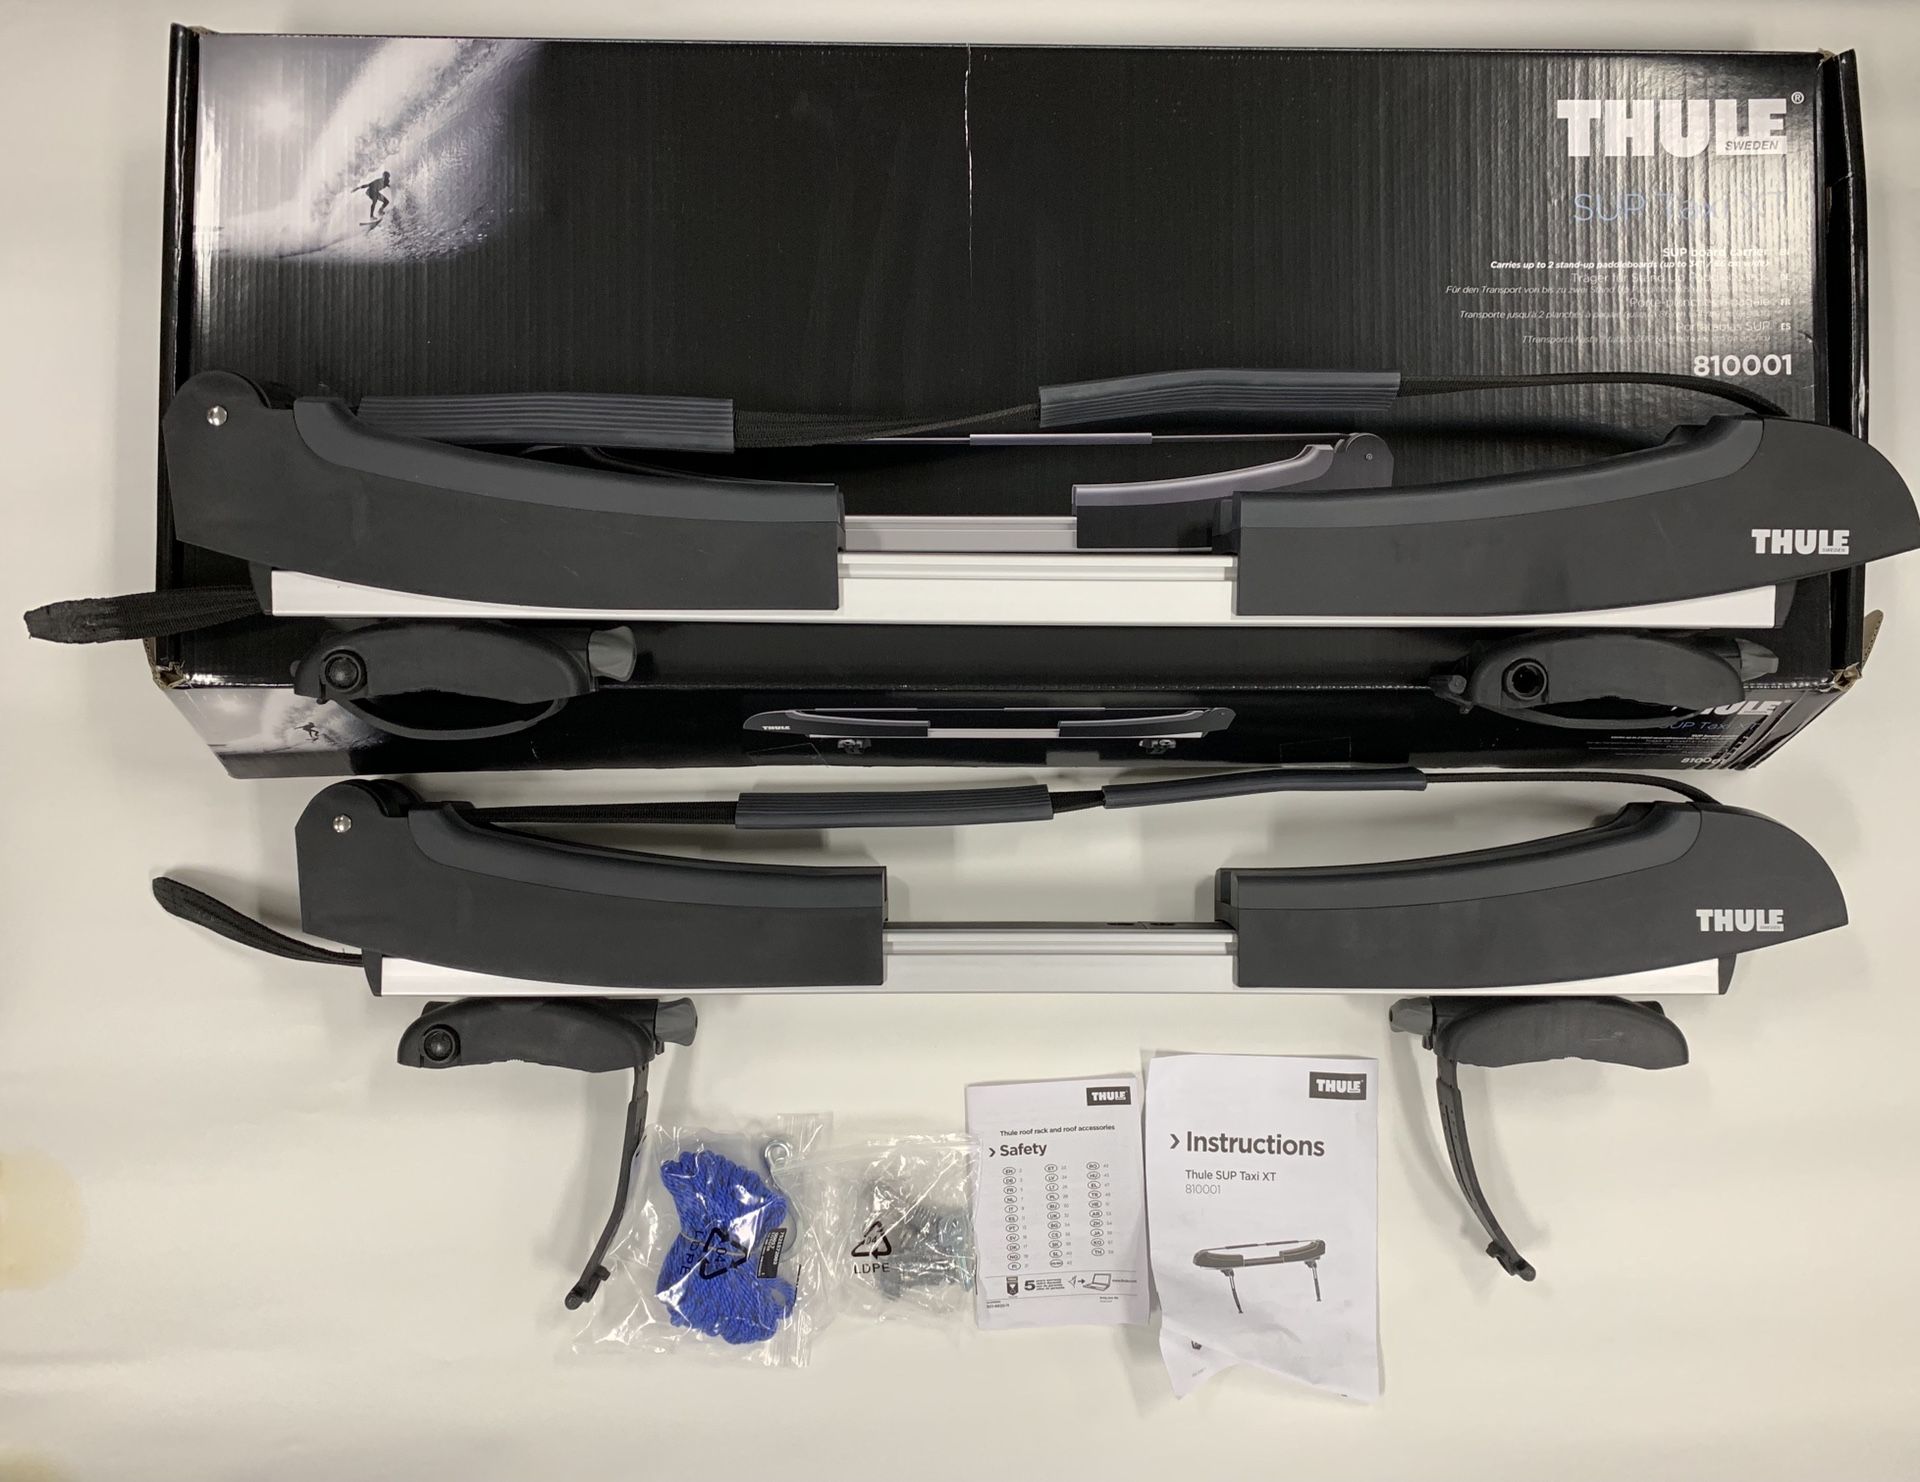 THULE ROOF RACK SUP Taxi - Paddleboard/surfboard rack